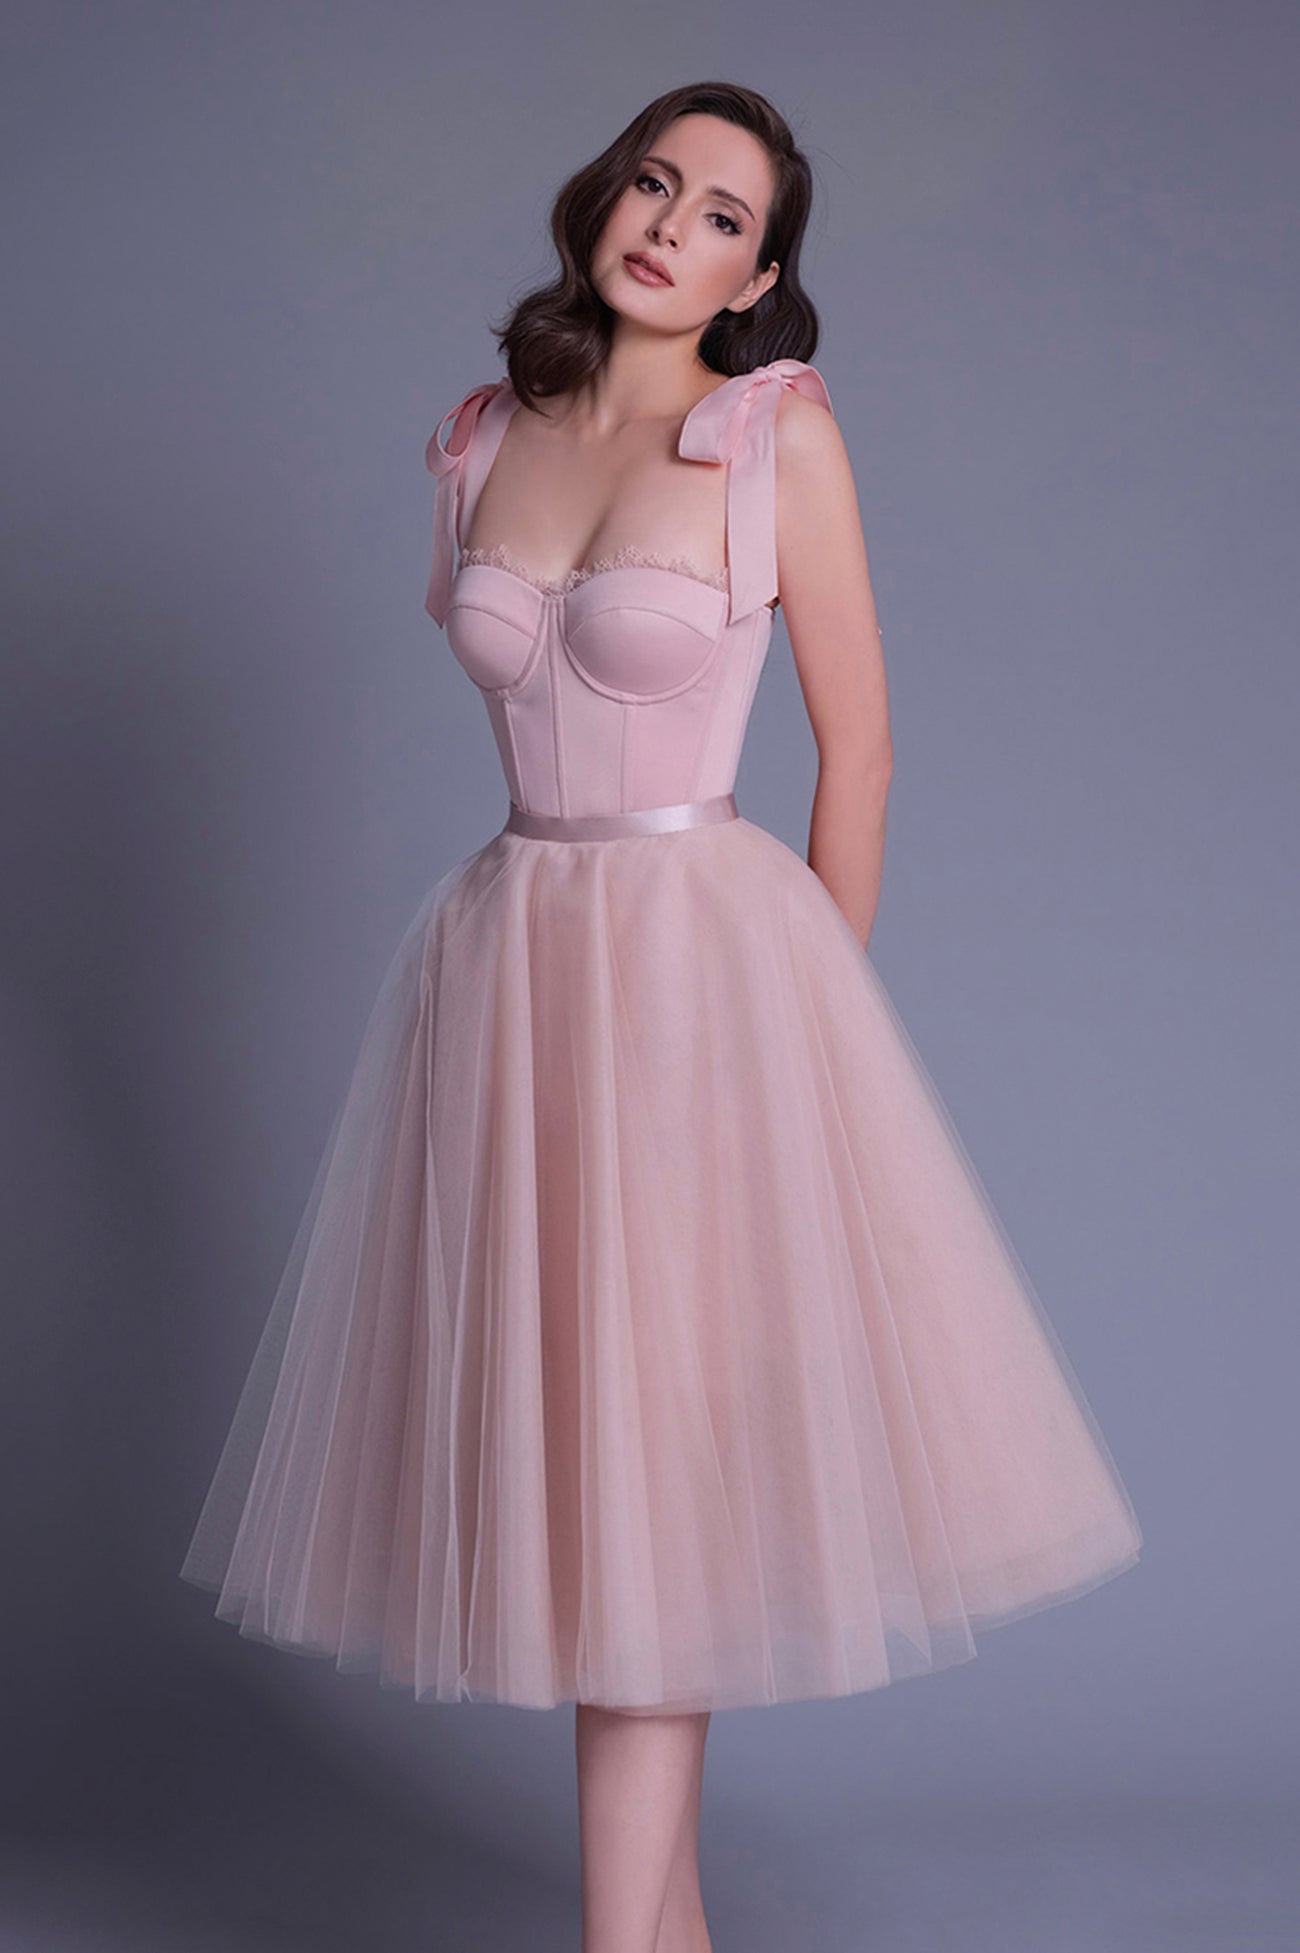 Pink Short A-Line Prom Dress with Corset, Cute Homecoming Party Dress